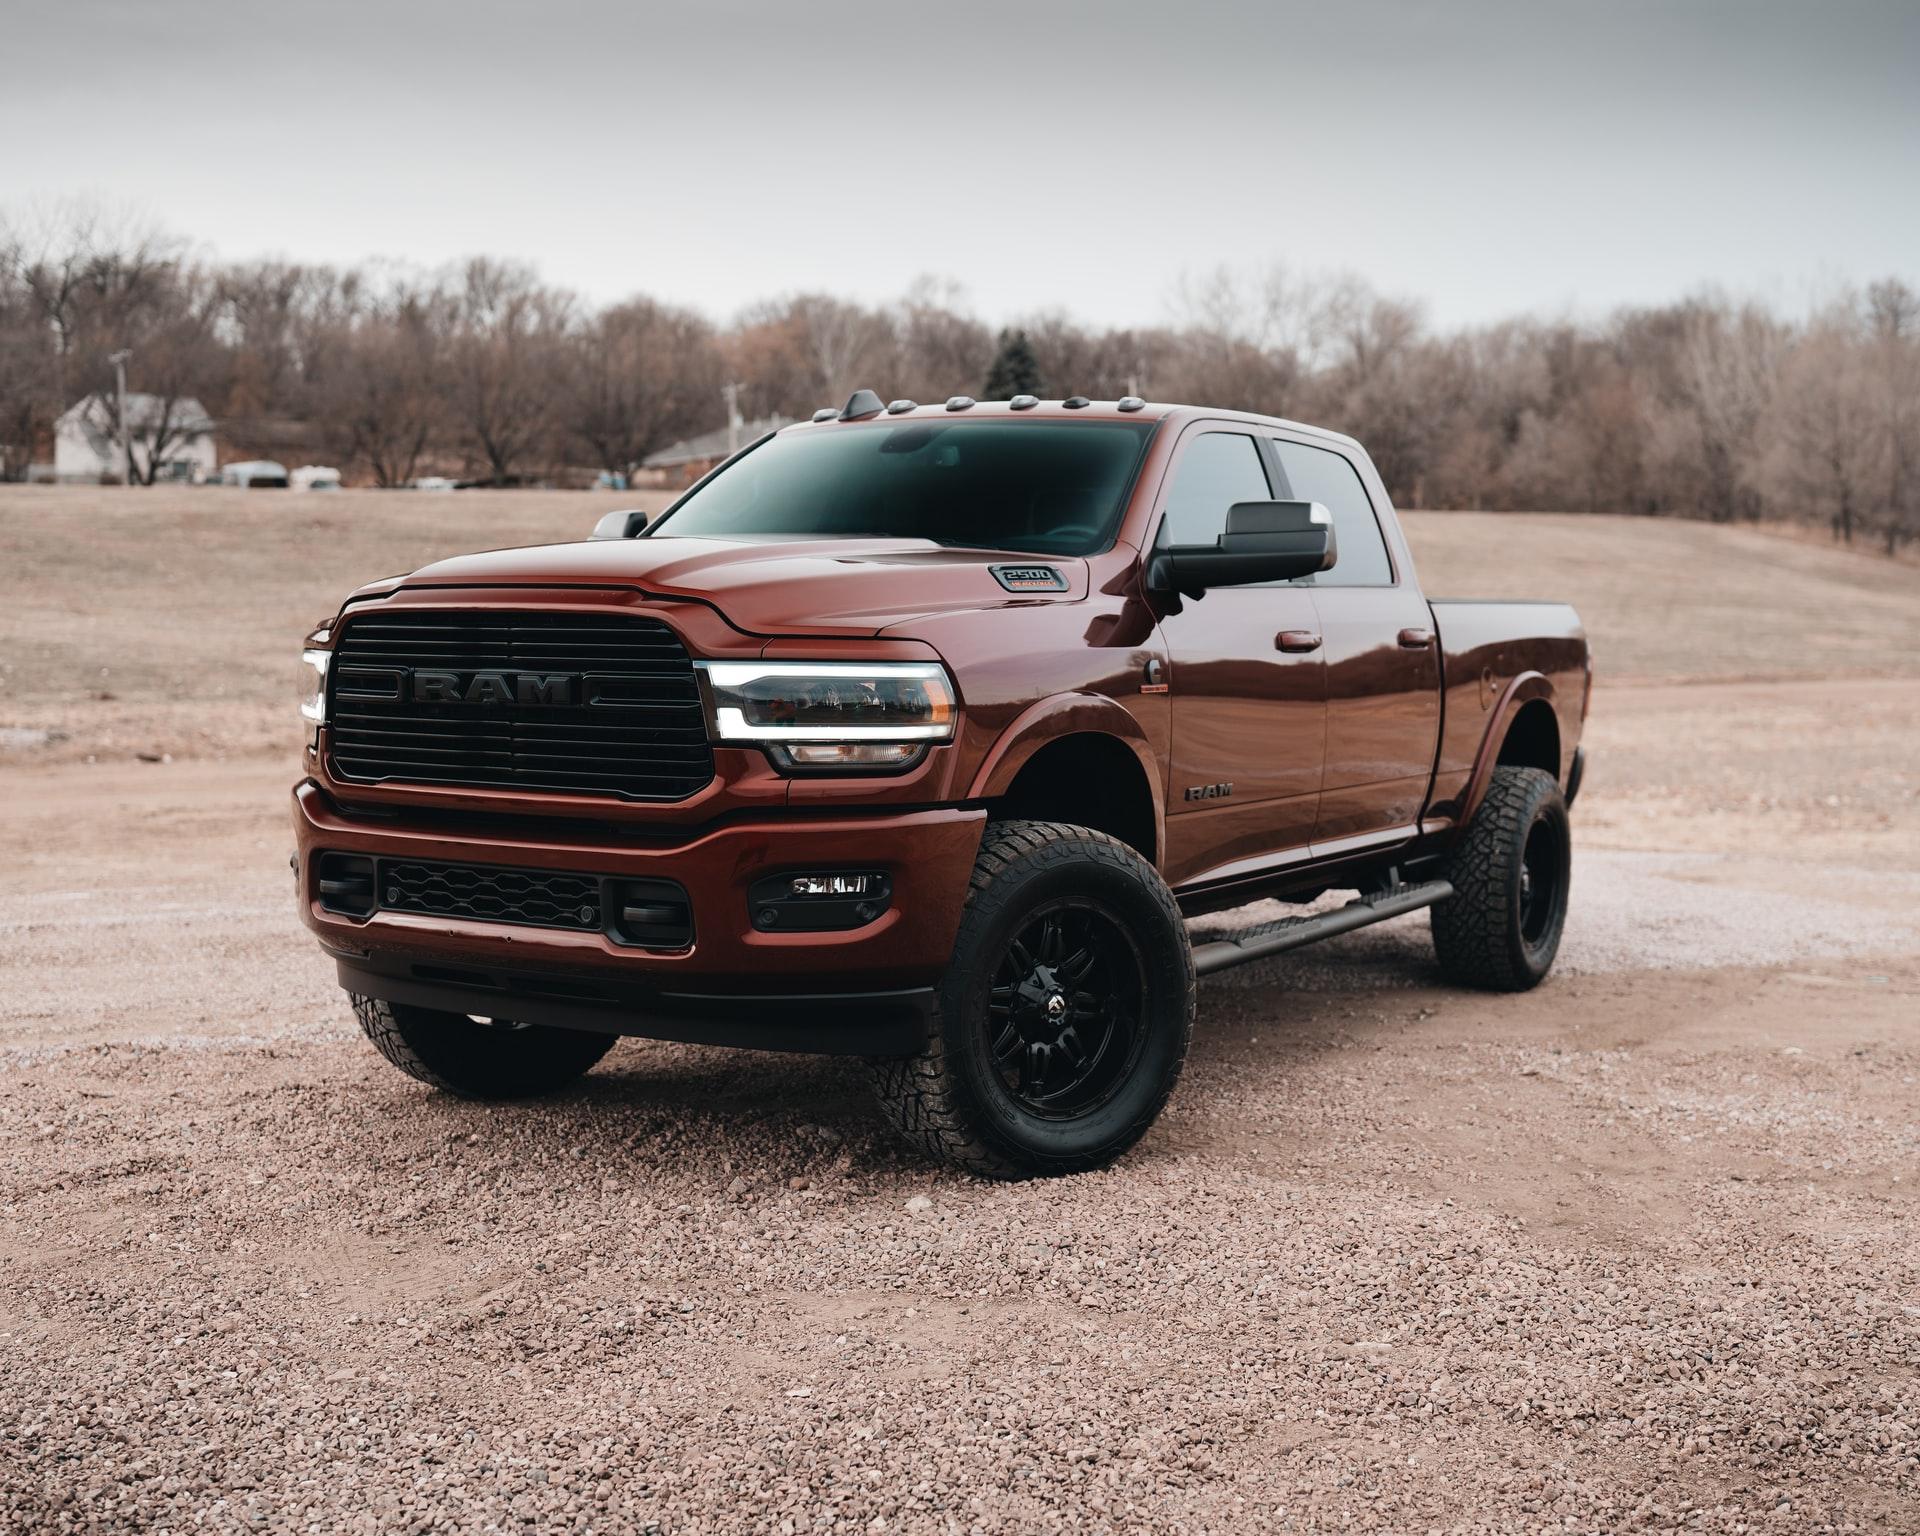 The Ram 2500 is one of the best new trucks available on the market.